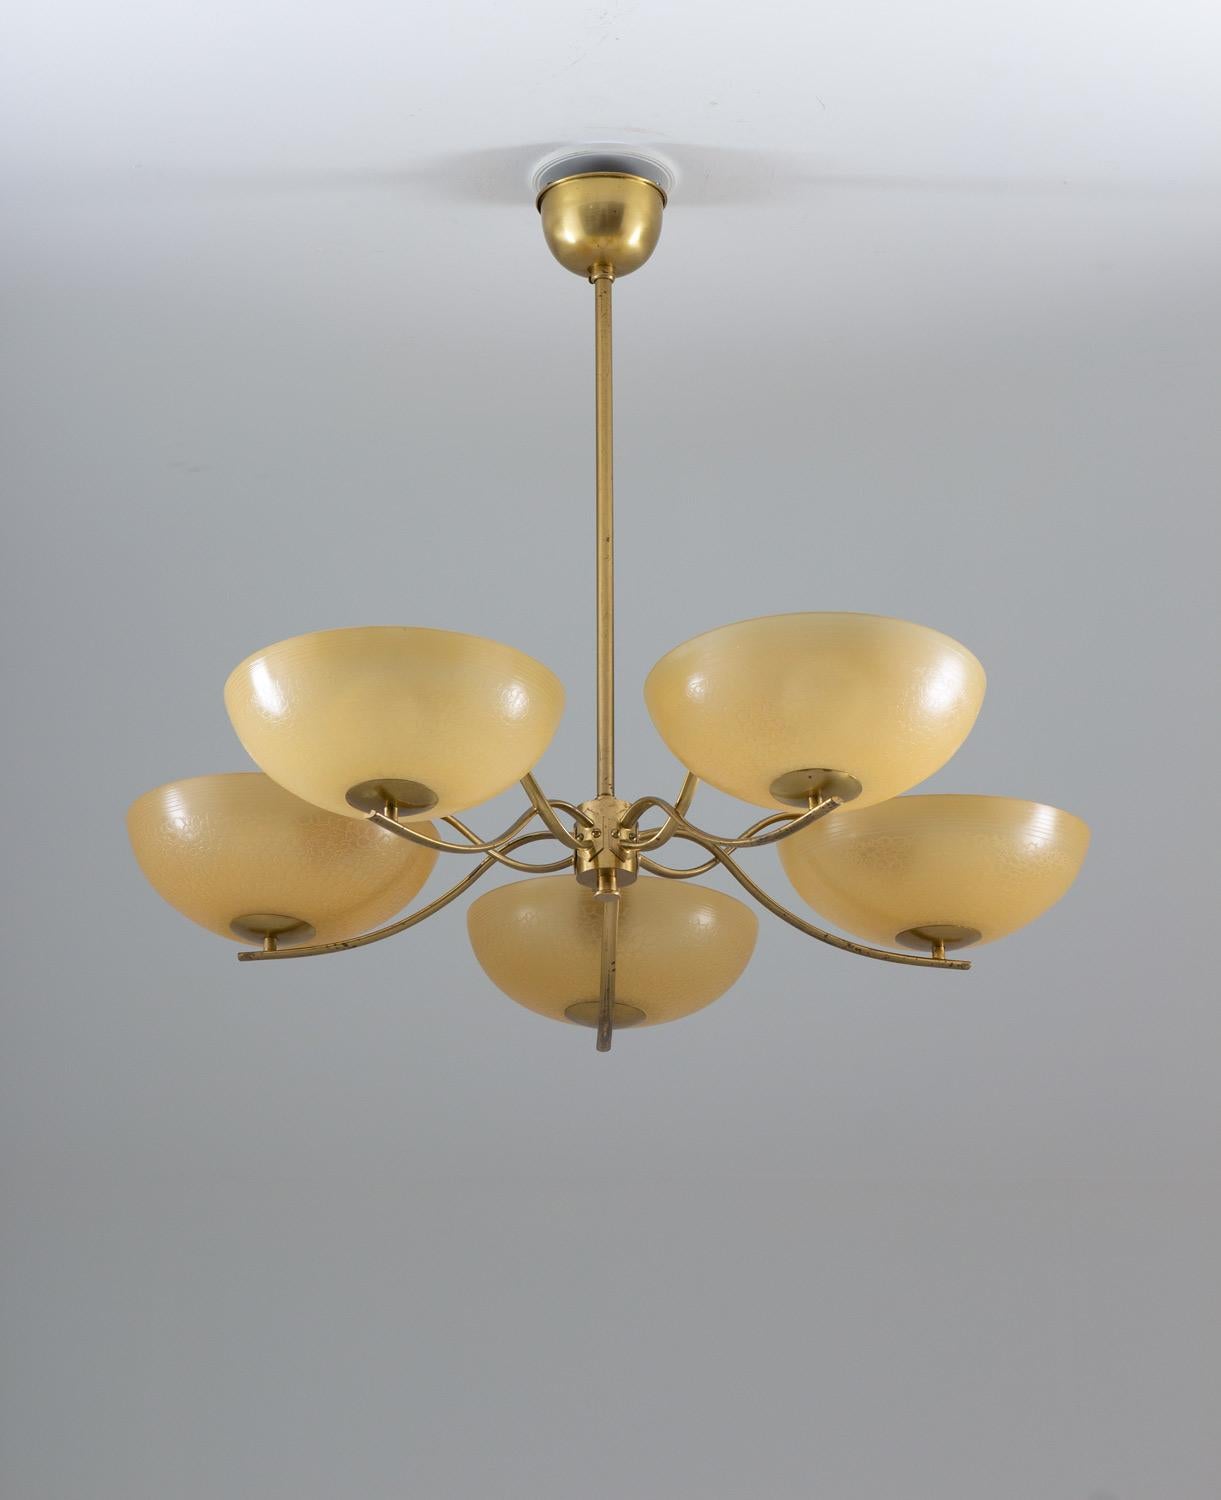 Art Deco chandelier in brass and glass, most likely produced in Sweden.
This great looking chandelier is made with a high sence of quality. The simple, elegant design makes it a great example of the art deco era. 
Each shade measures 23cm / 9in in